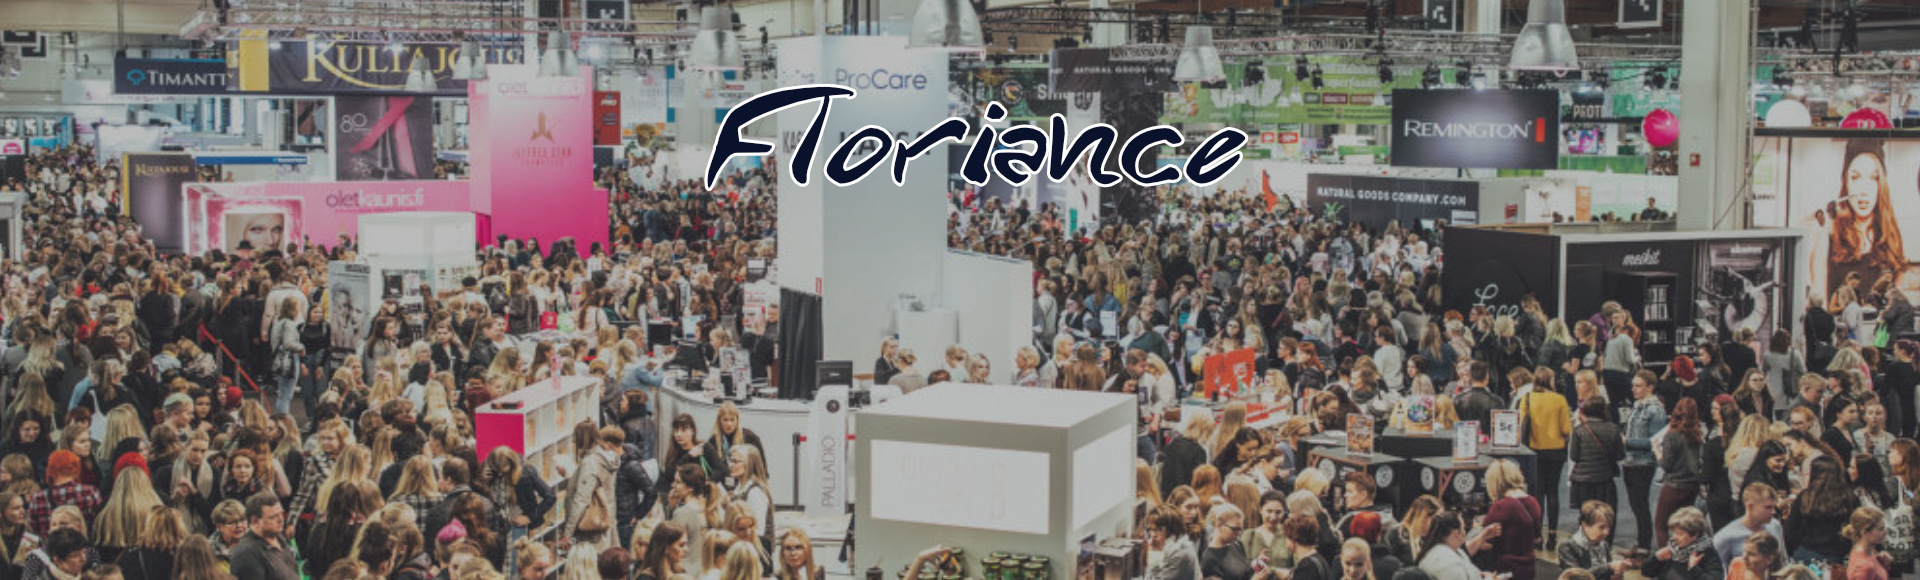 Floriance exhibition consulting